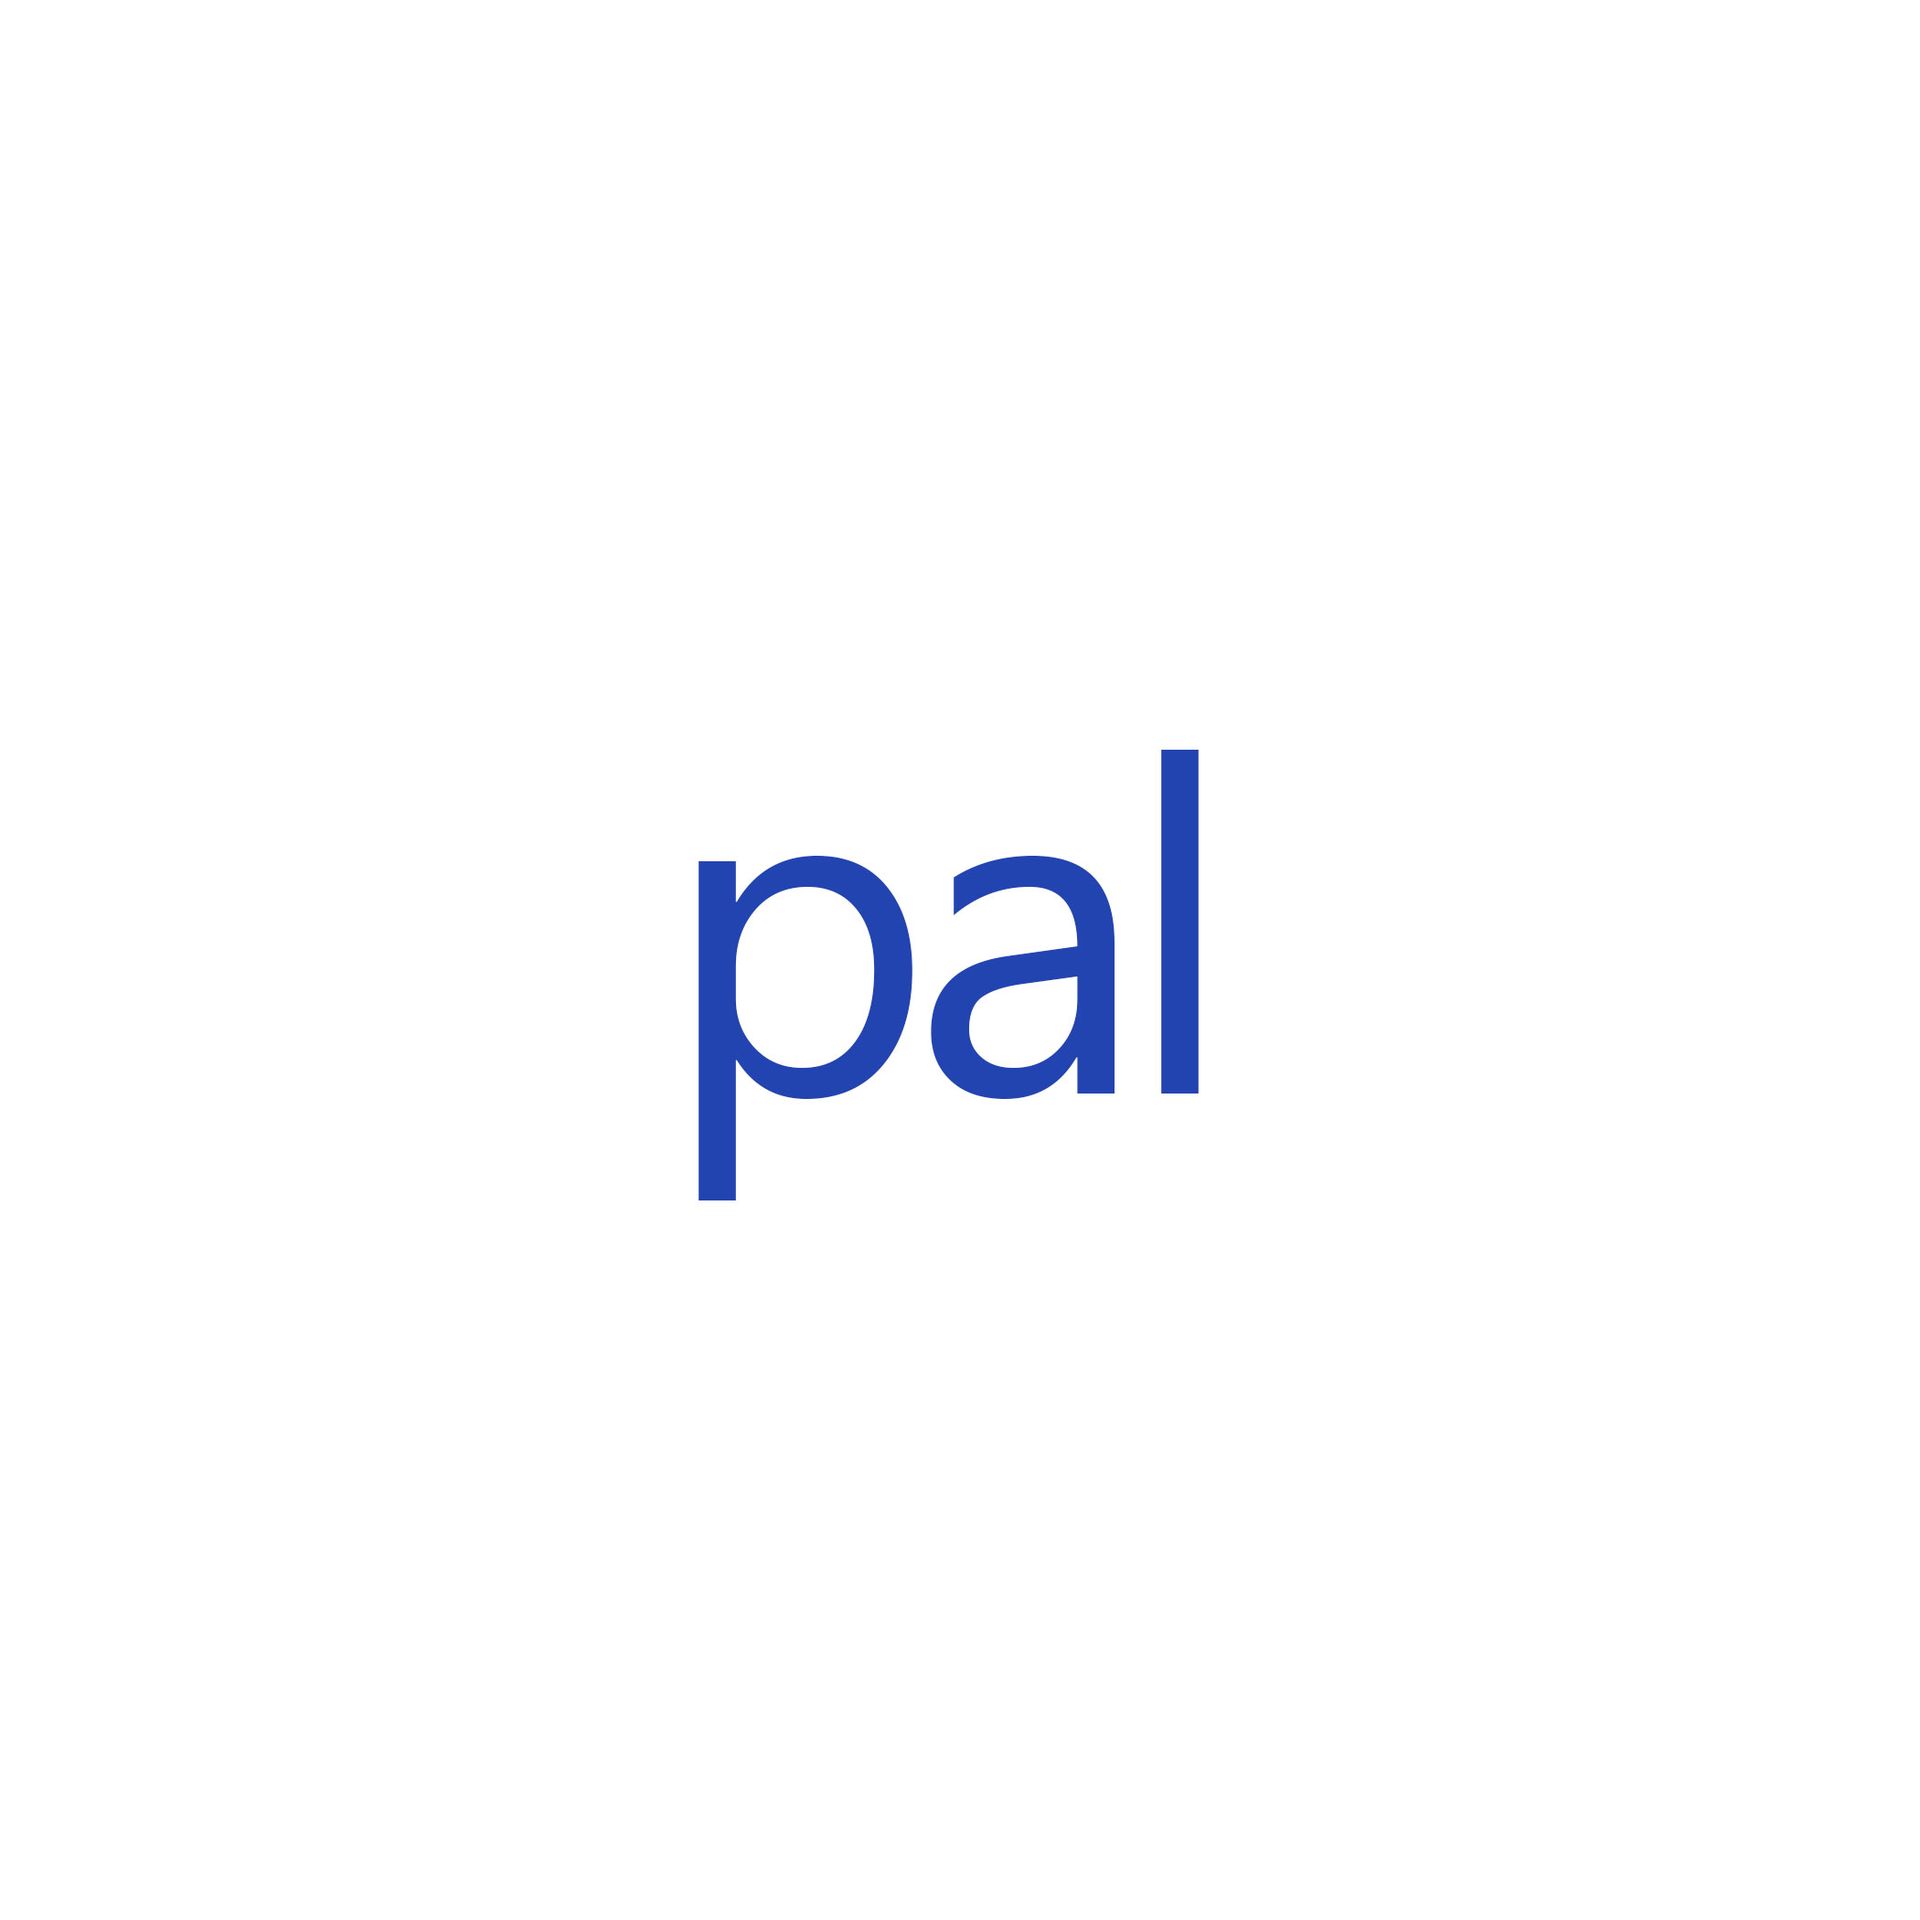 Product Brand: PAL